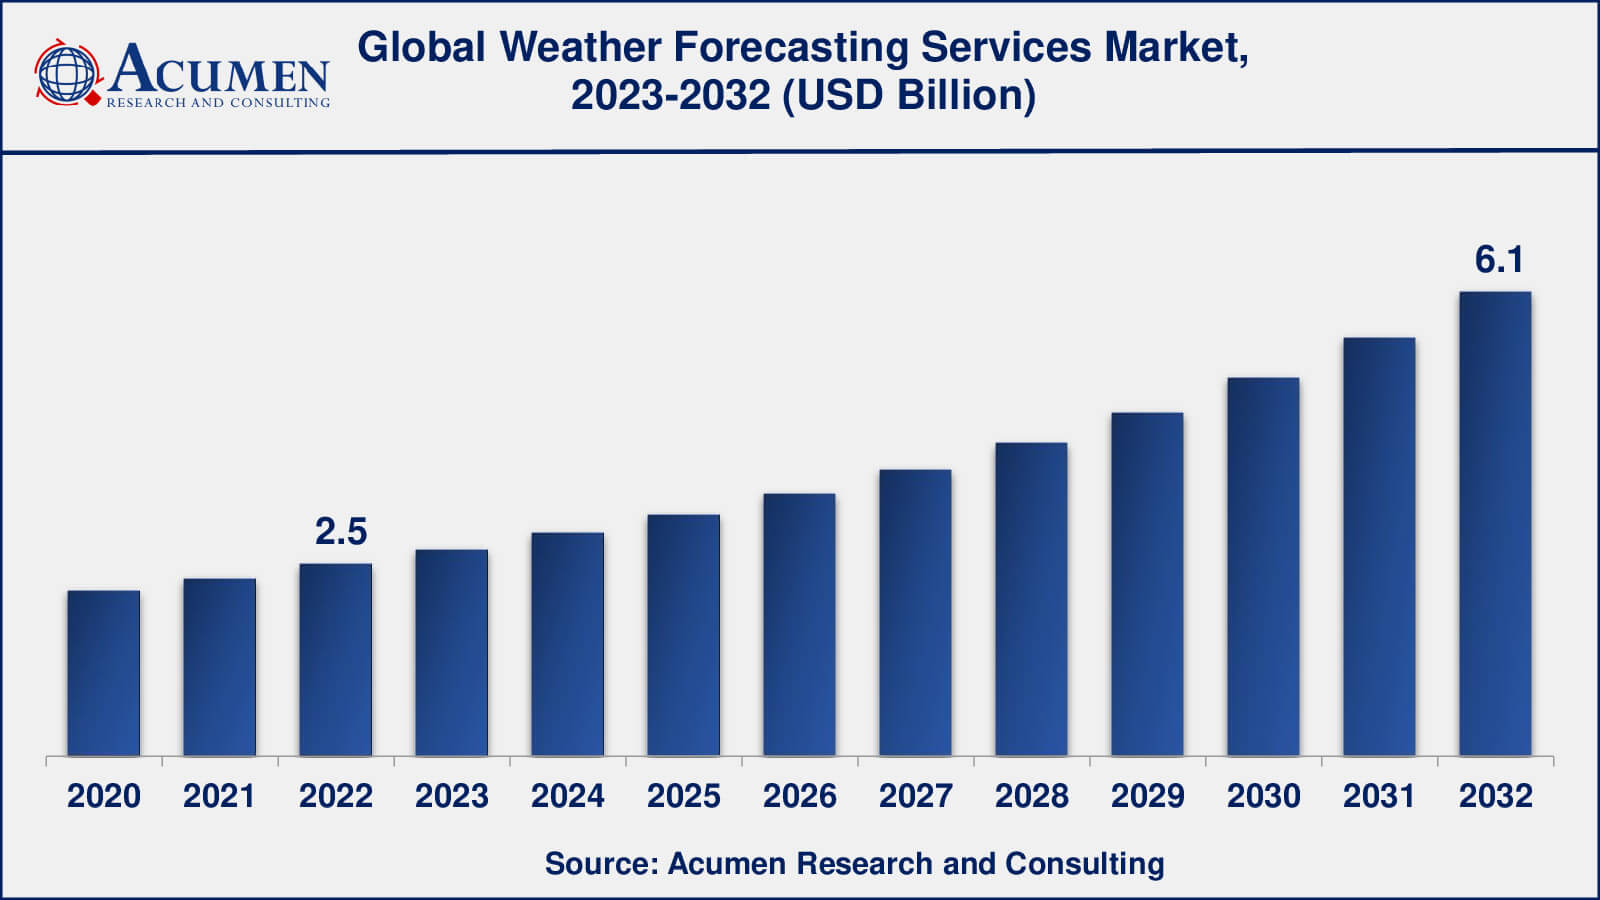 Global Weather Forecasting Services Market Dynamics